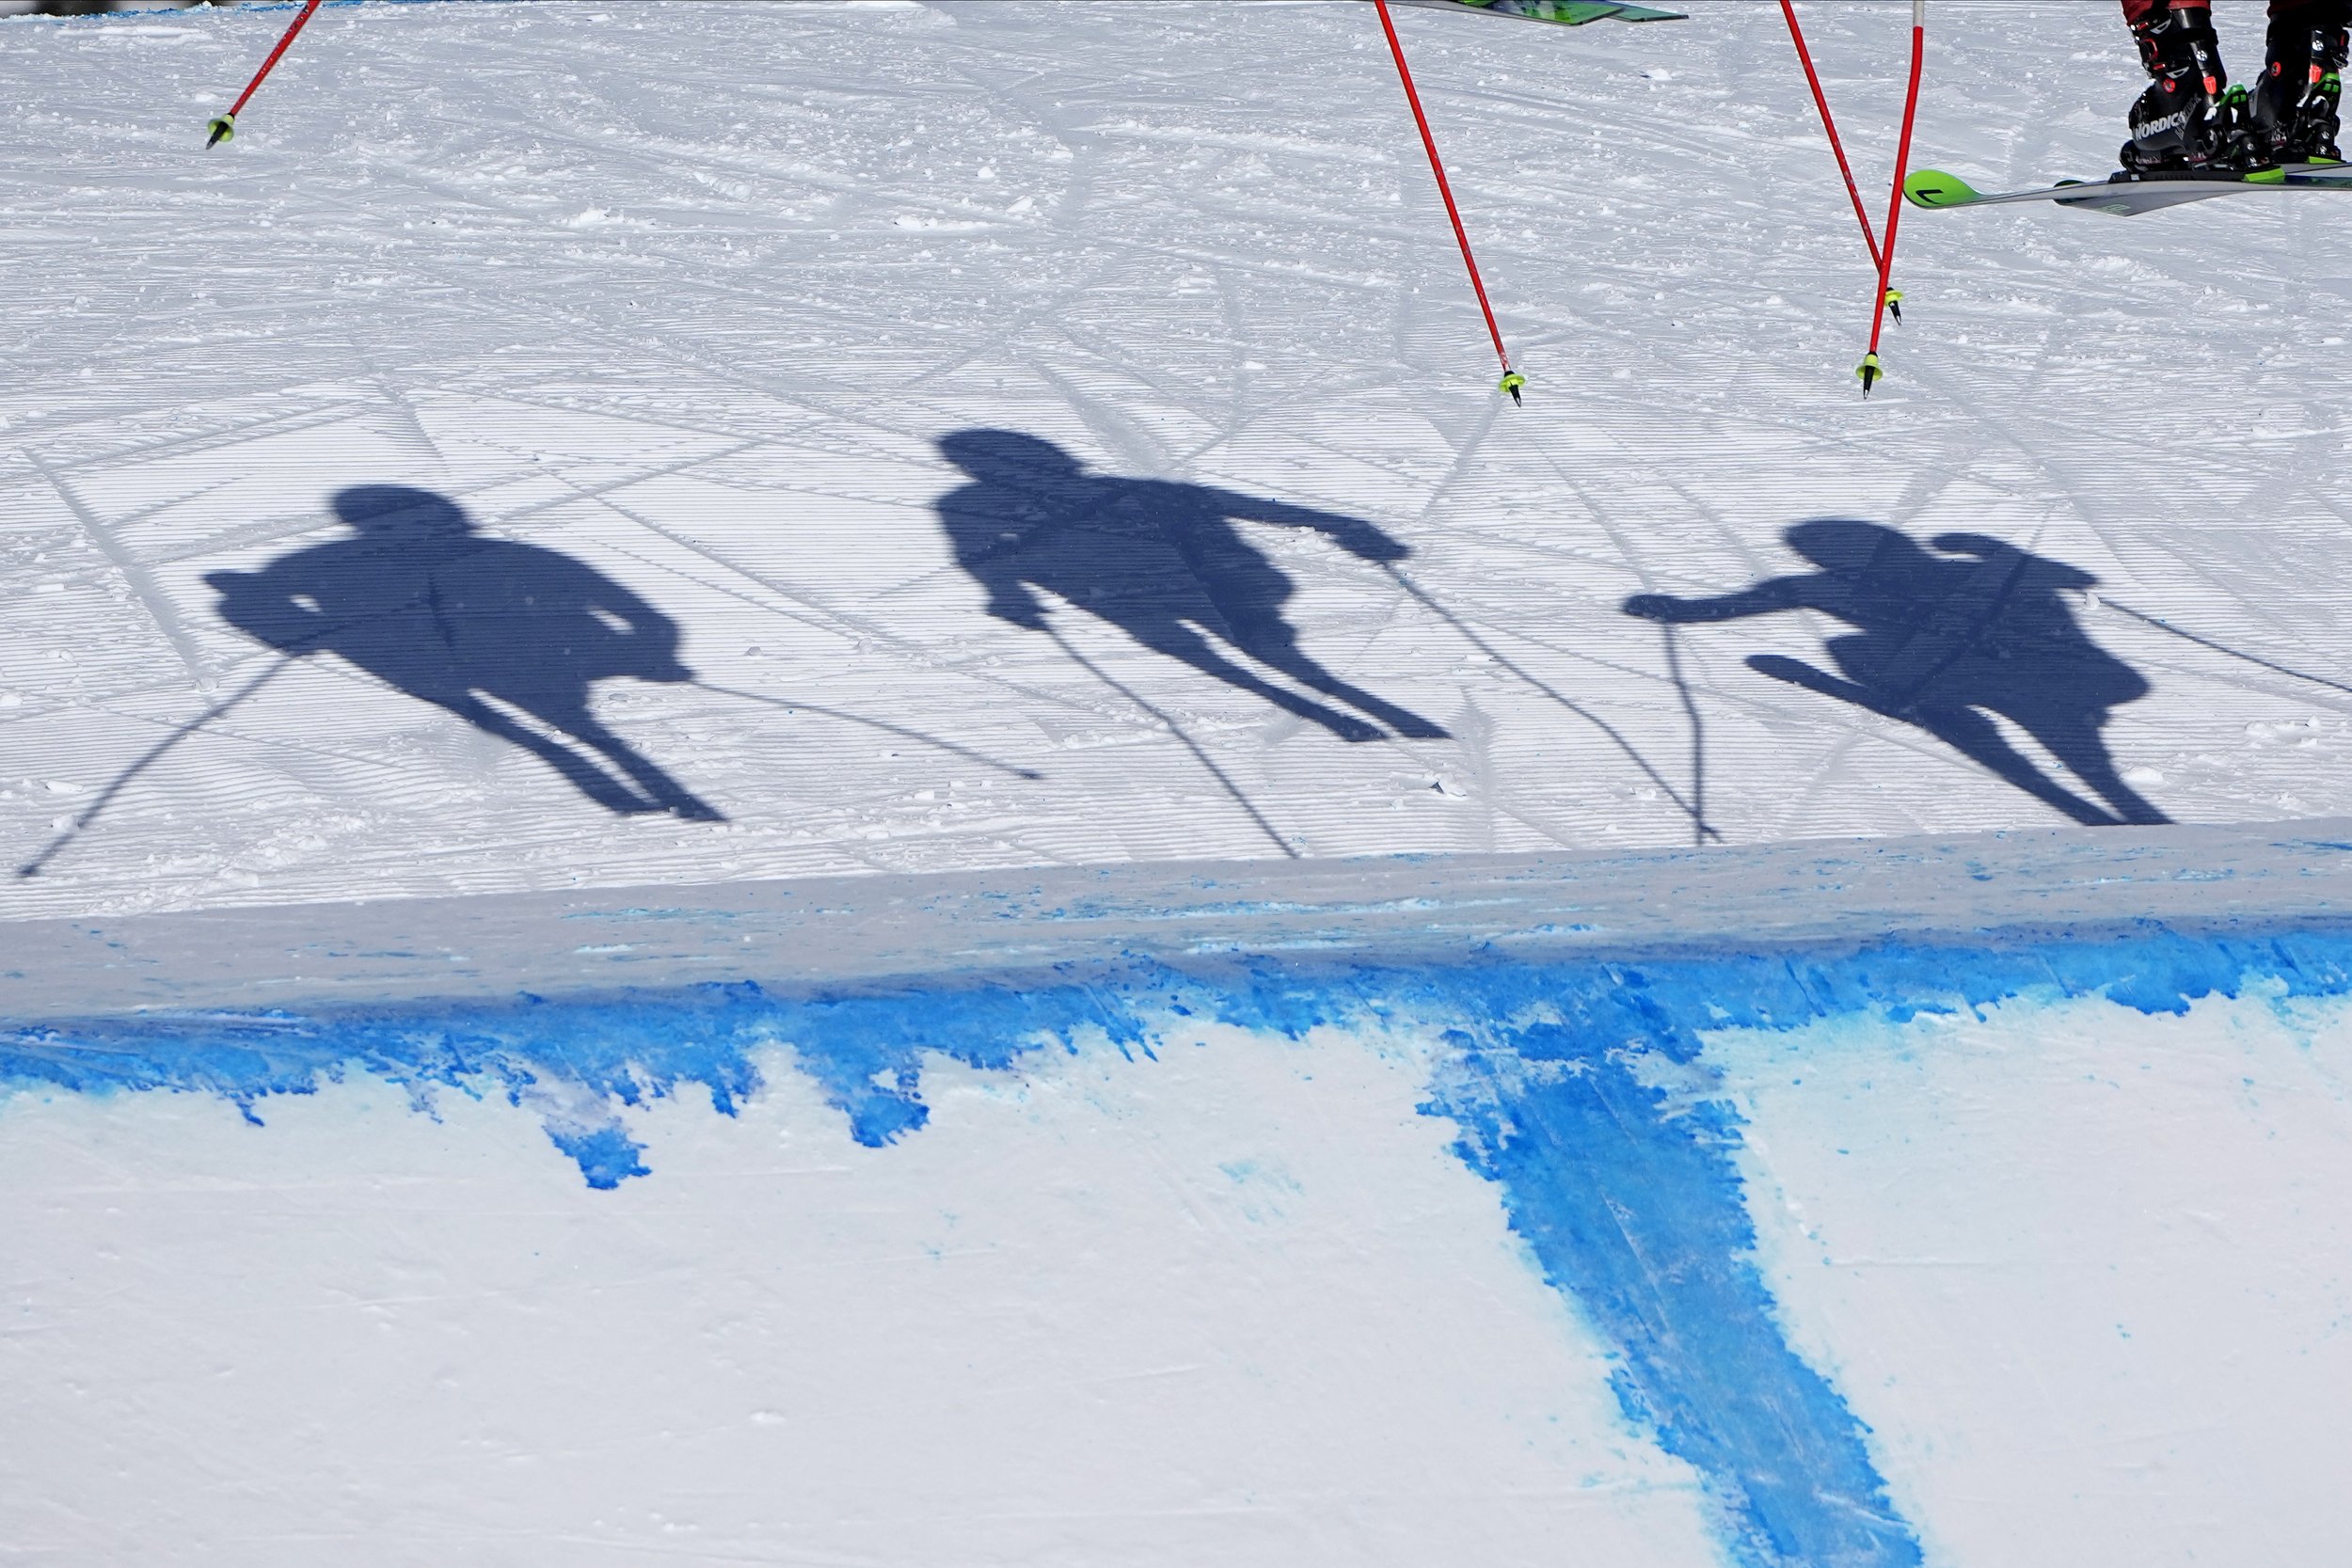  The shadows of the skiers cast on the course during the men's cross finals at the 2022 Winter Olympics, Friday, Feb. 18, 2022, in Zhangjiakou, China. (AP Photo/Gregory Bull) 